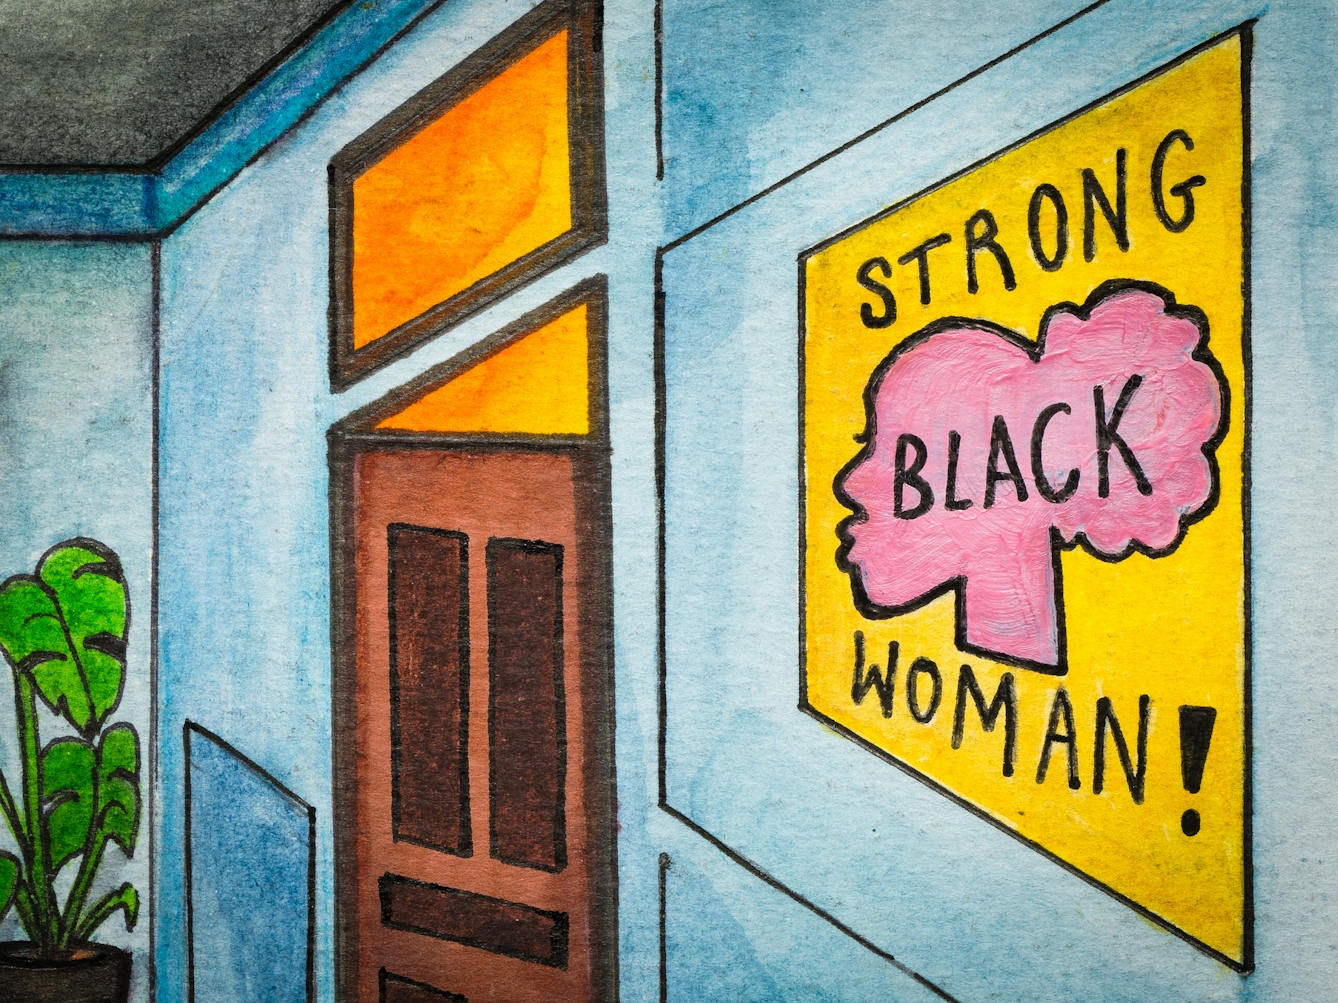 Detail from larger colourful artwork made with paint and ink on textured watercolour paper. The artwork shows a scene in a bedroom with predominantly hues of blues, greens and yellows. On the wall to the right is a large yellow poster with the words 'Strong Black Woman!' Written across a drawing of a Black woman's head seen in profile. 